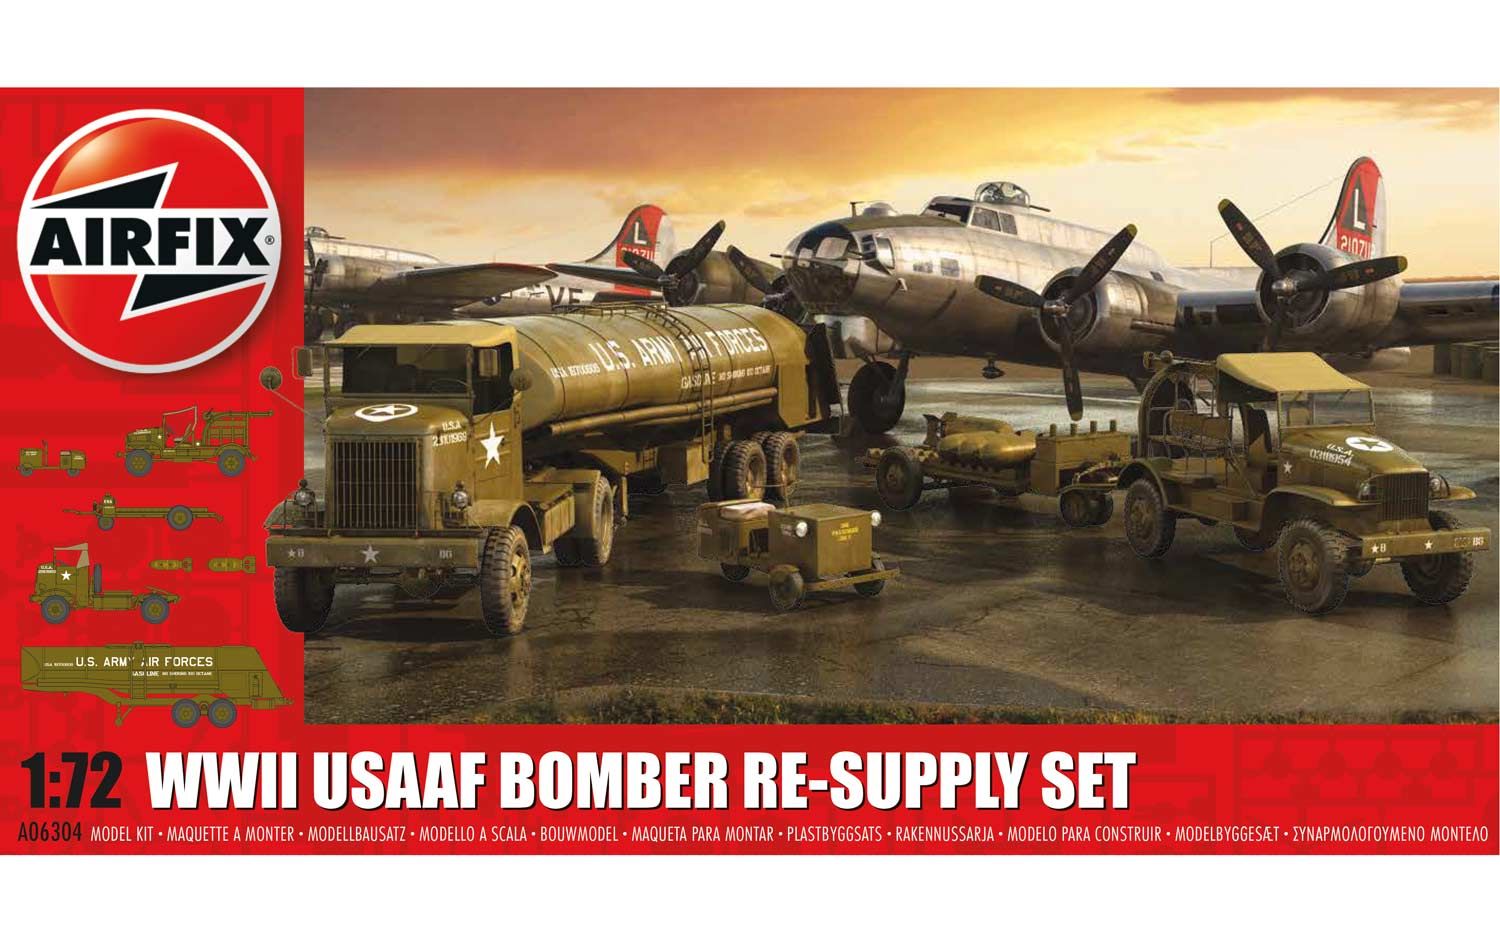 WWII USAAF 8th Bomber Resupply Set (1:72) - Loaded Dice Barry Vale of Glamorgan CF64 3HD